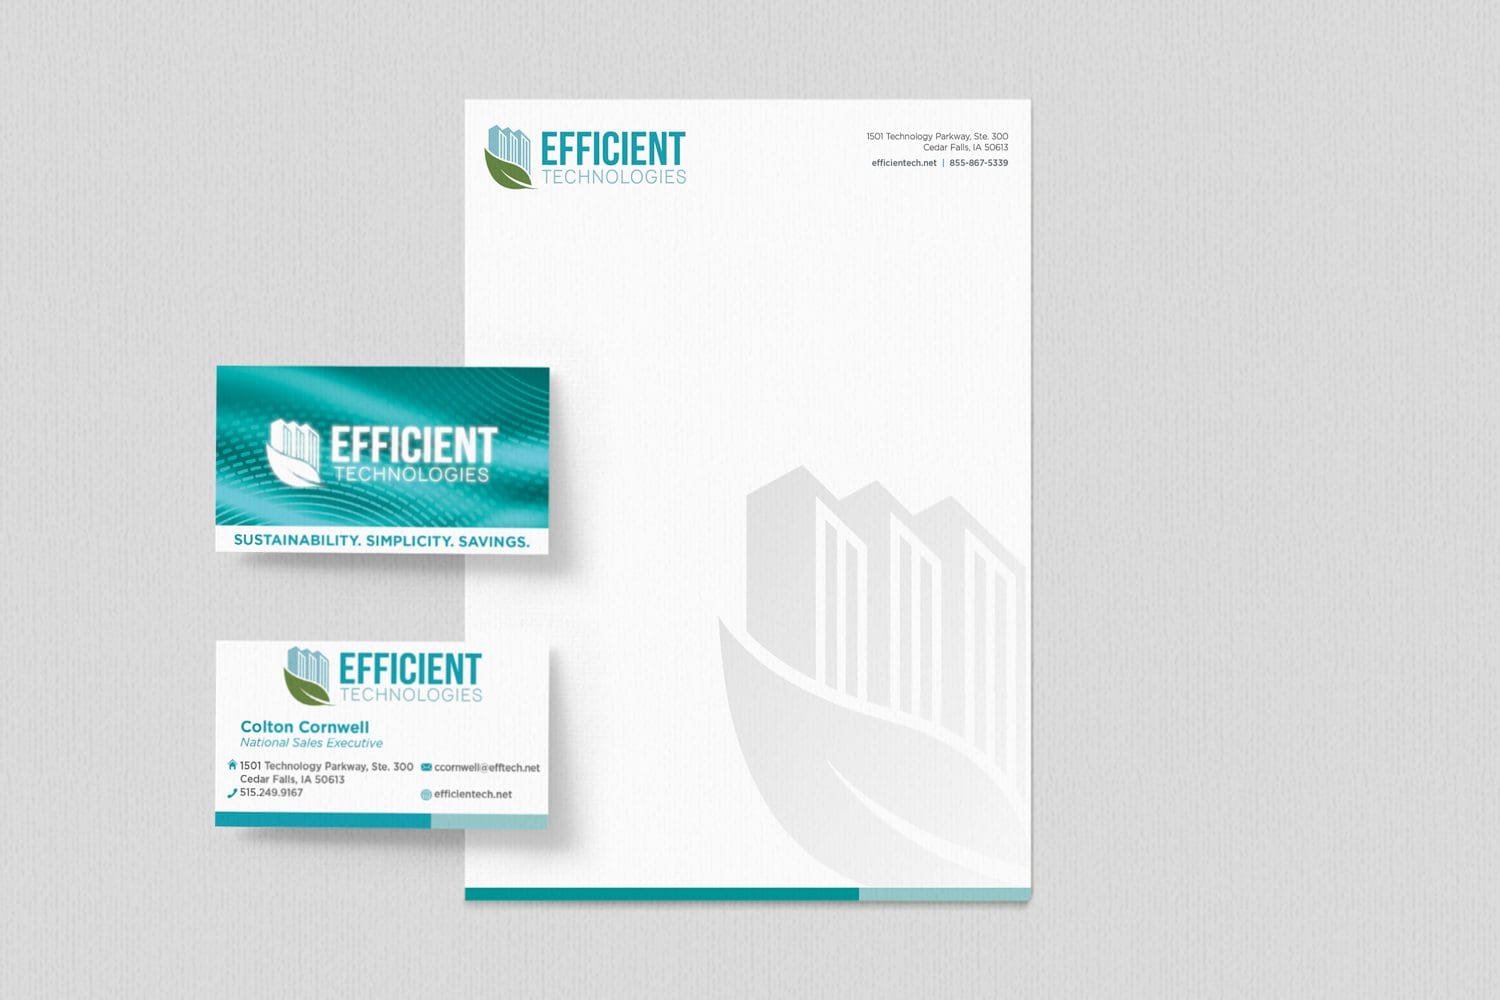 Efficient Technologies business cards and letterhead